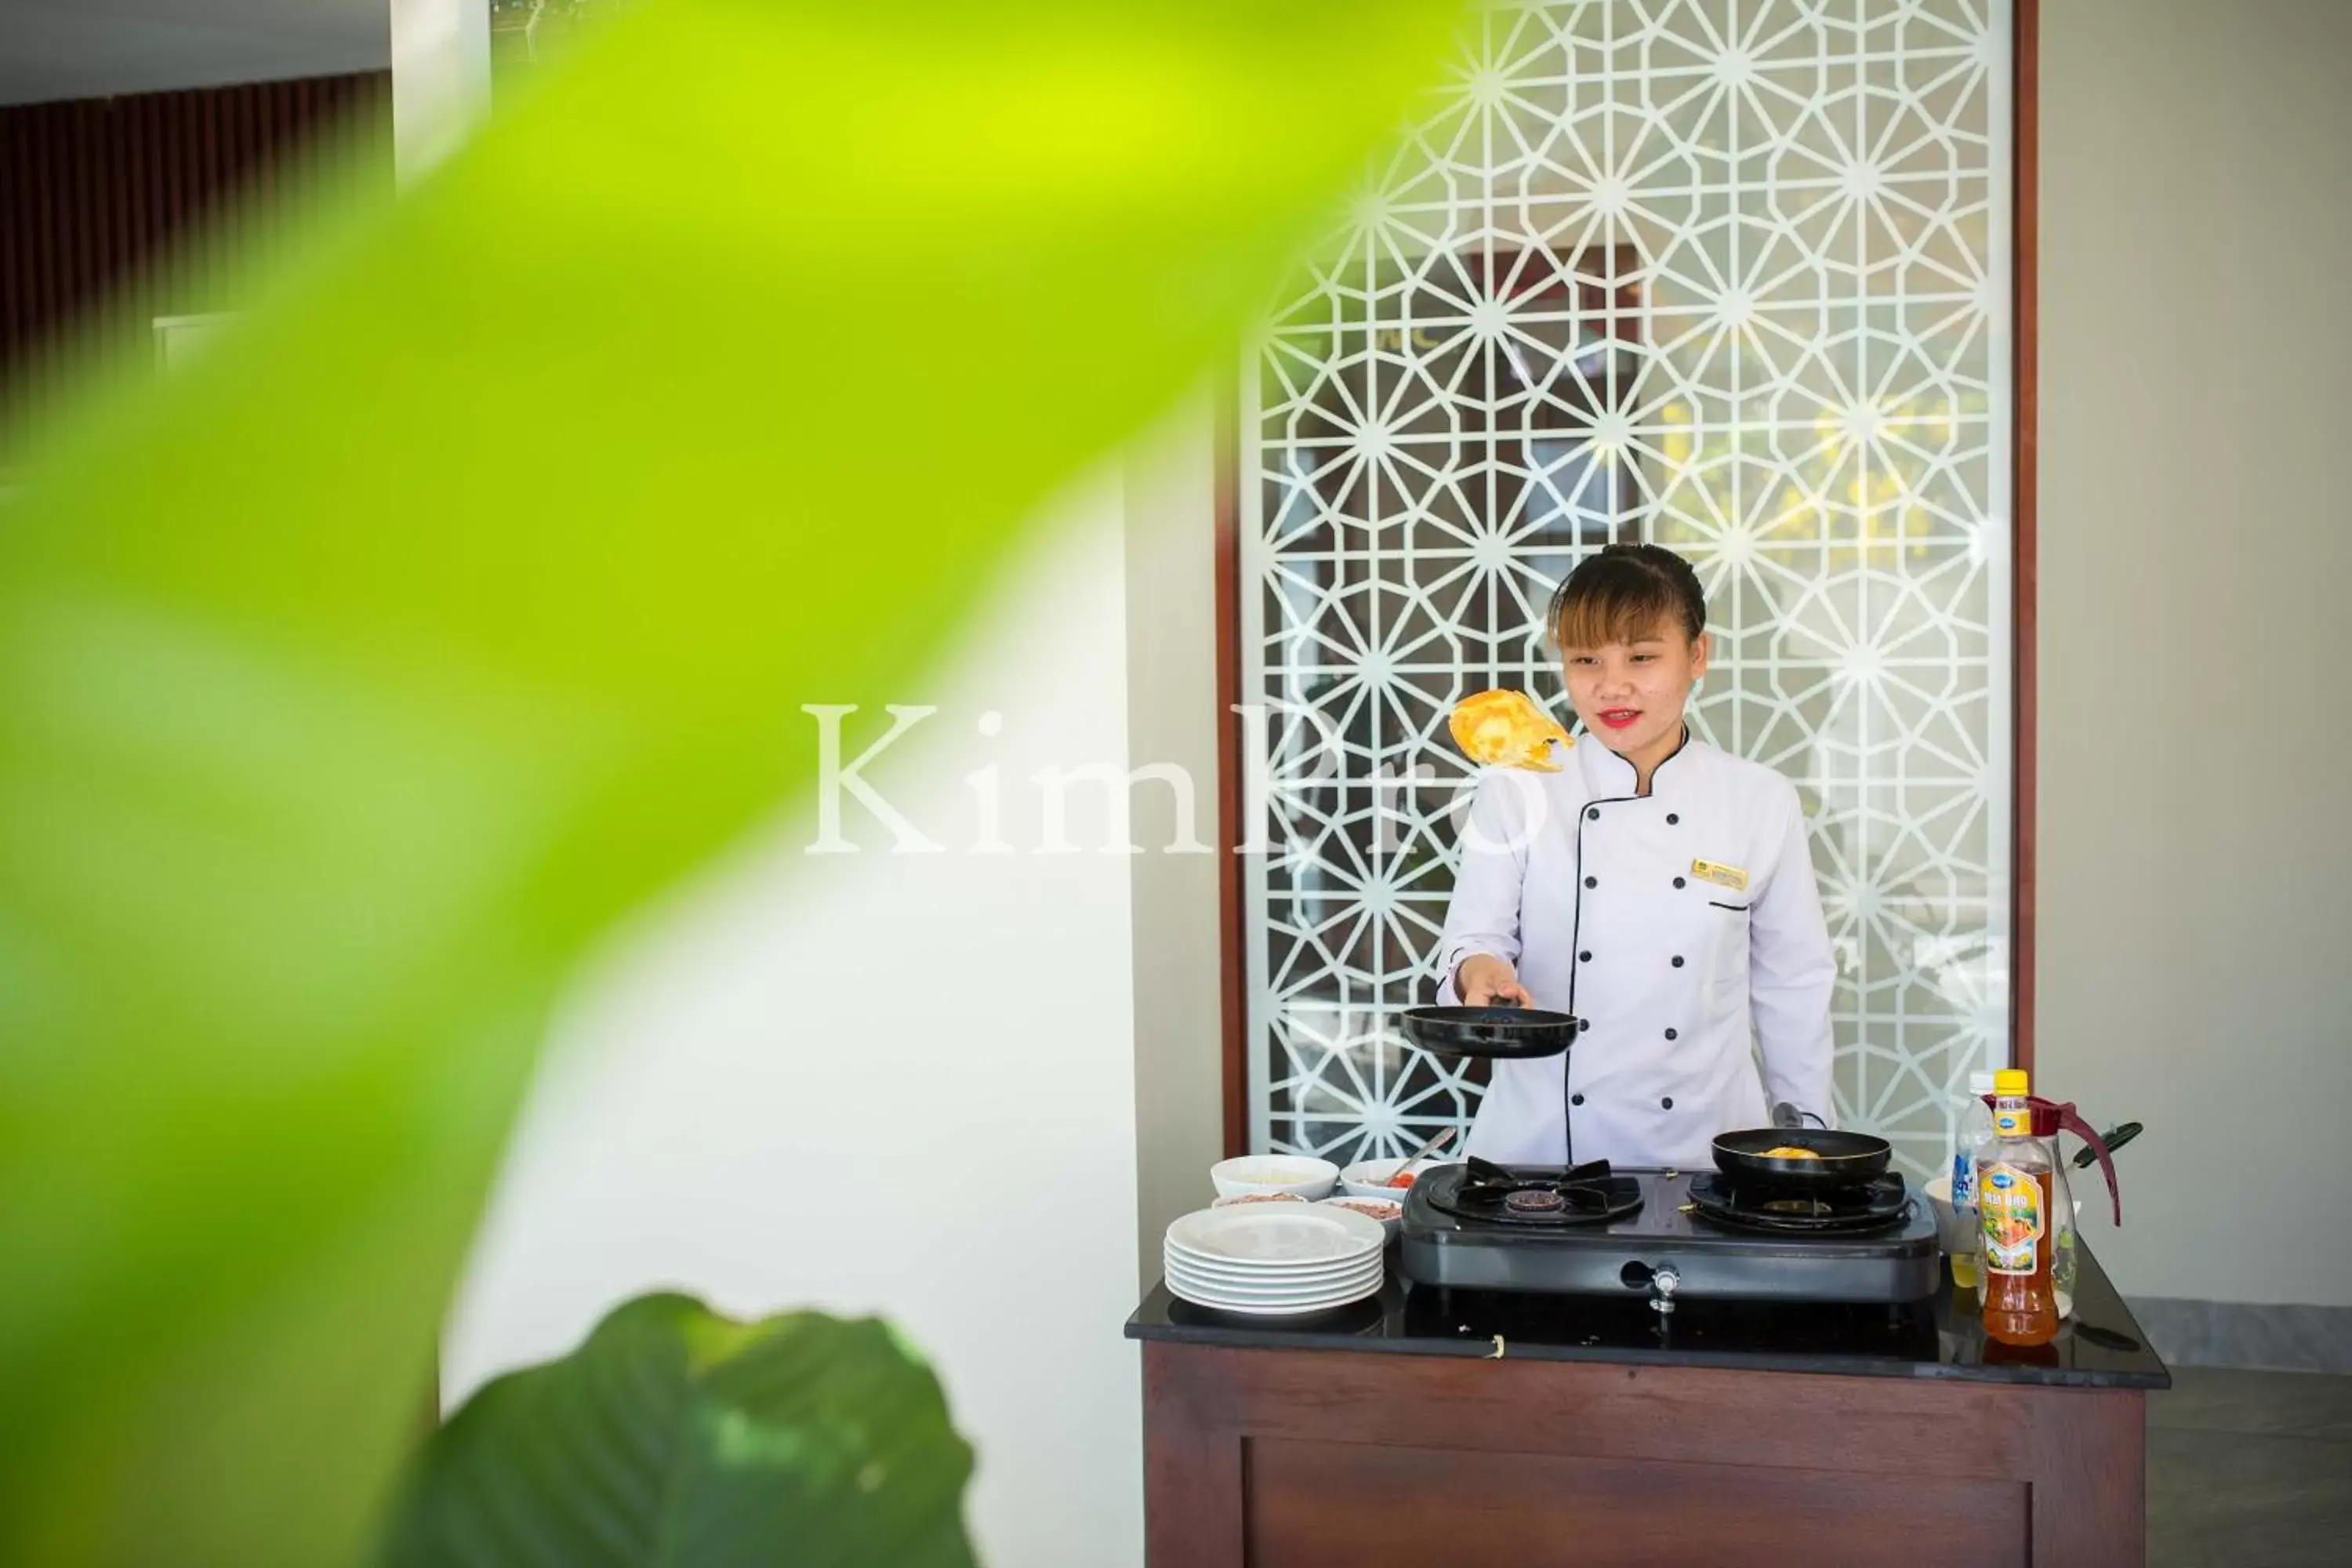 Staff in Hoi An Green Apple Hotel